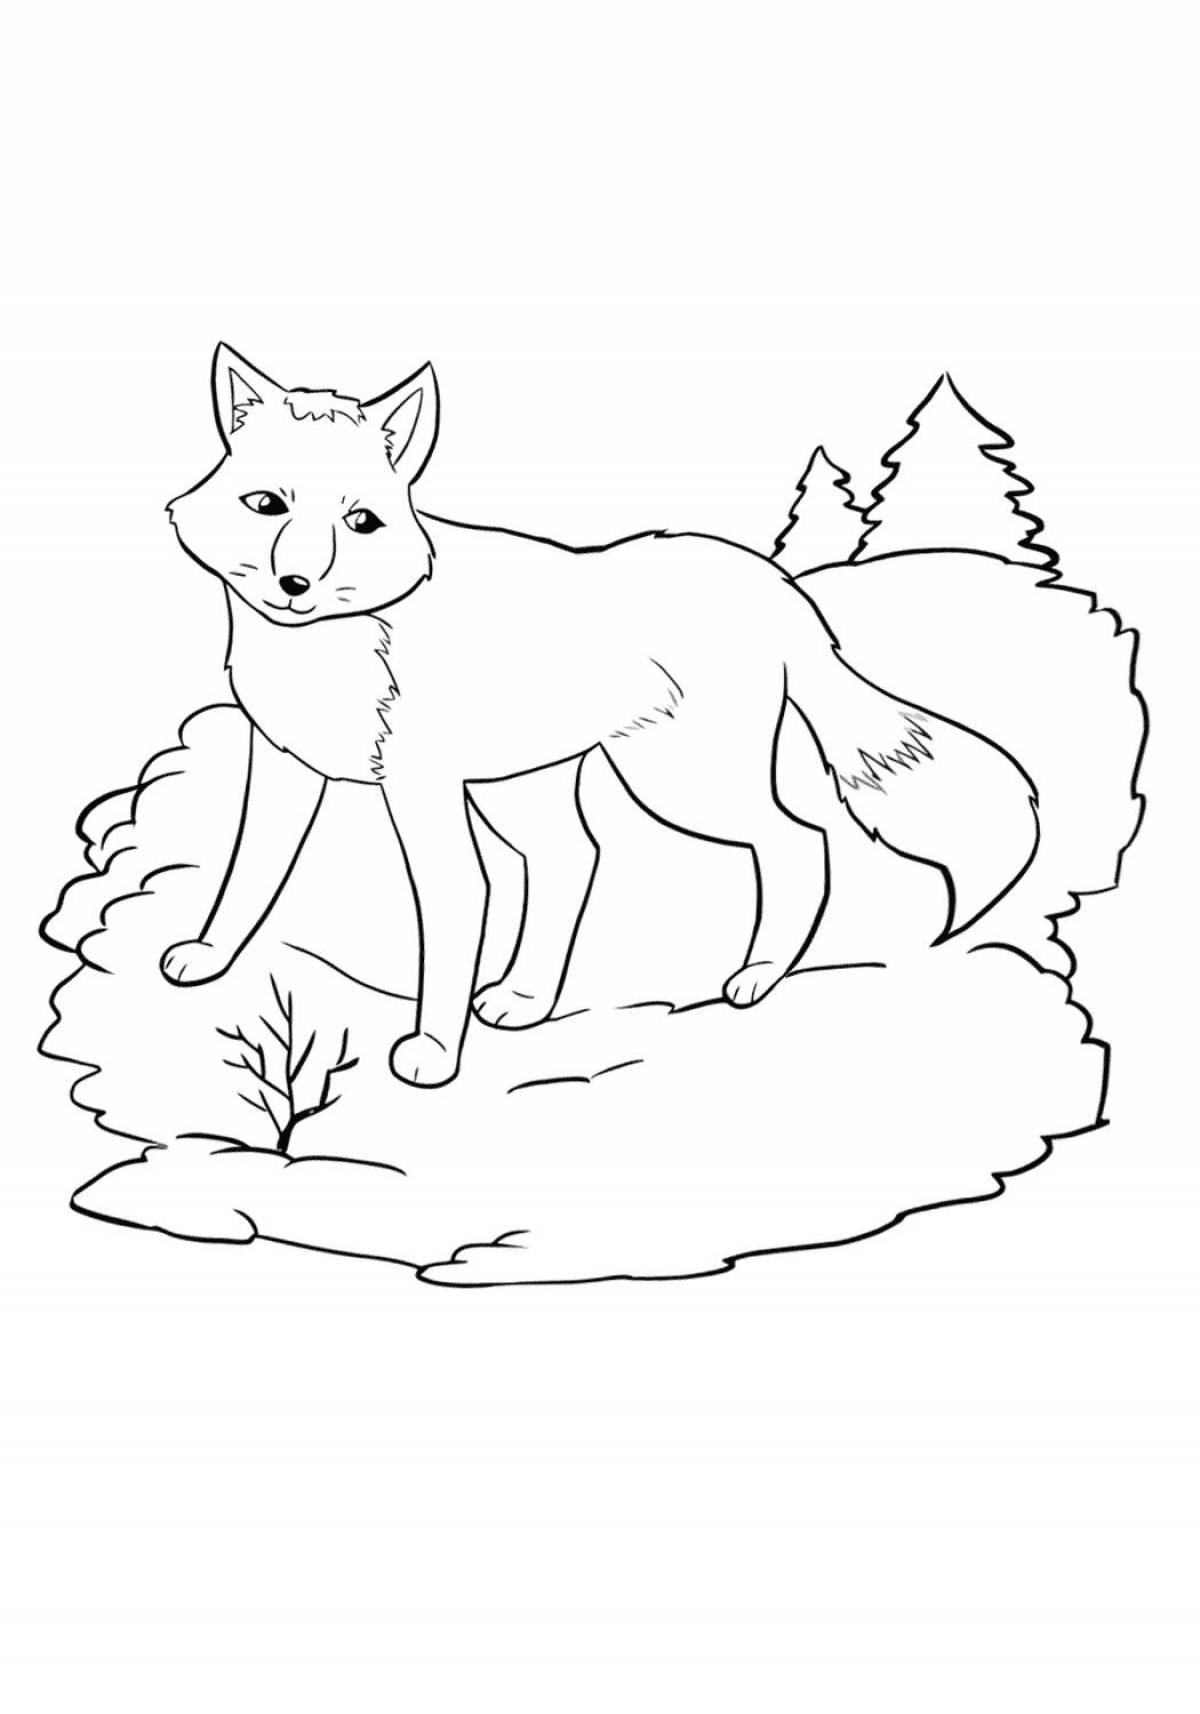 Intriguing fox coloring page